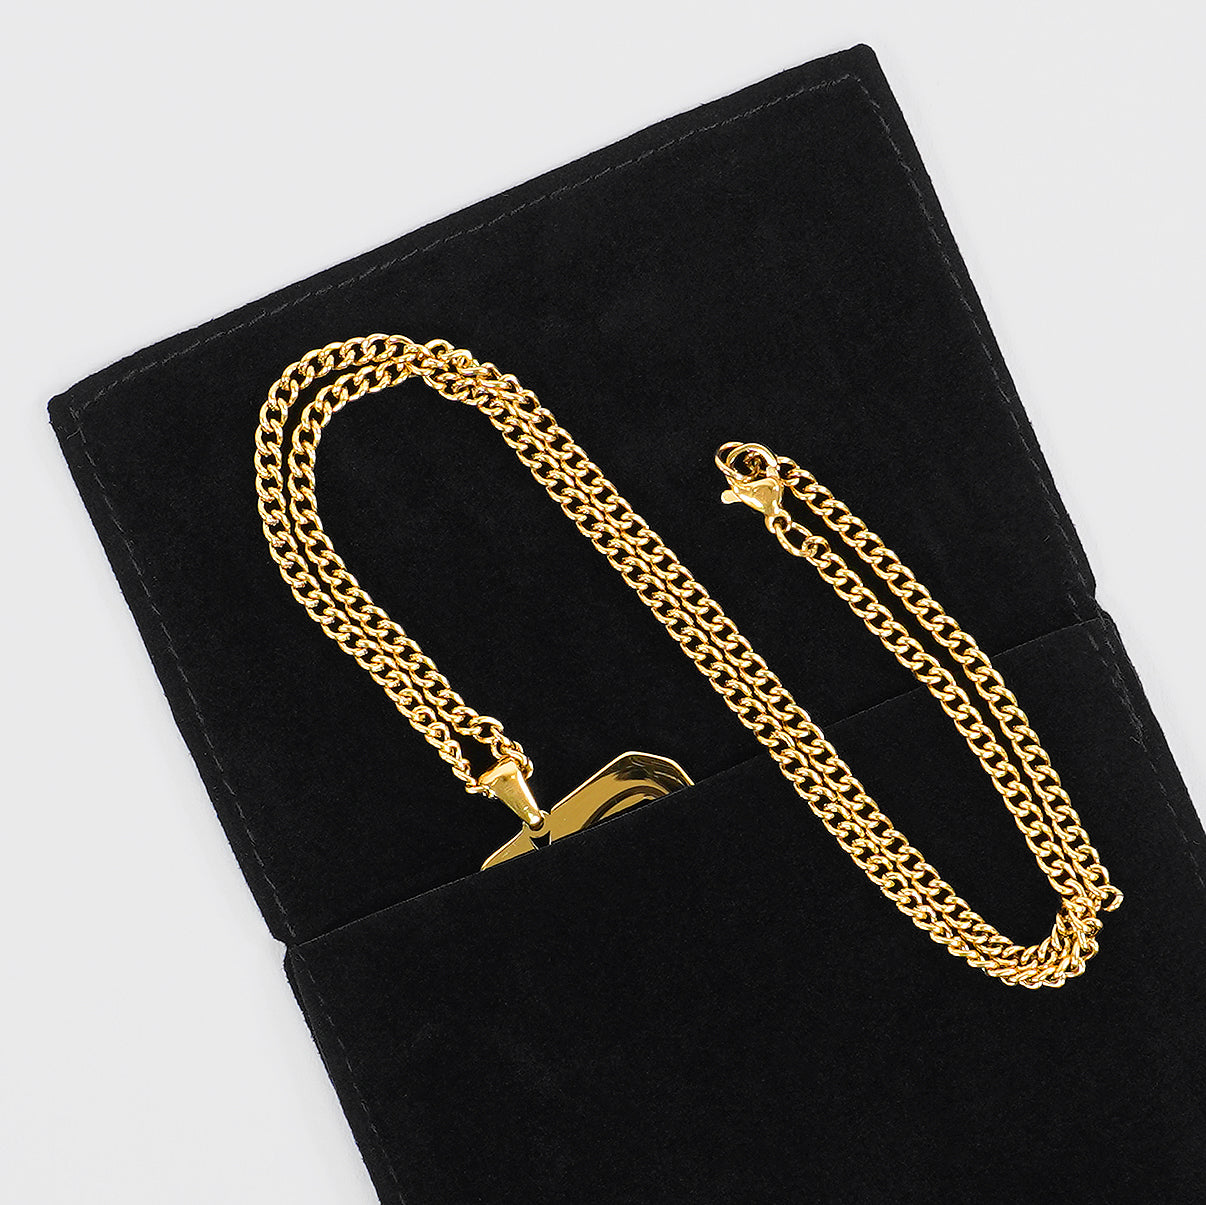 32 Number Pendant with Chain Necklace - Gold Plated Stainless Steel